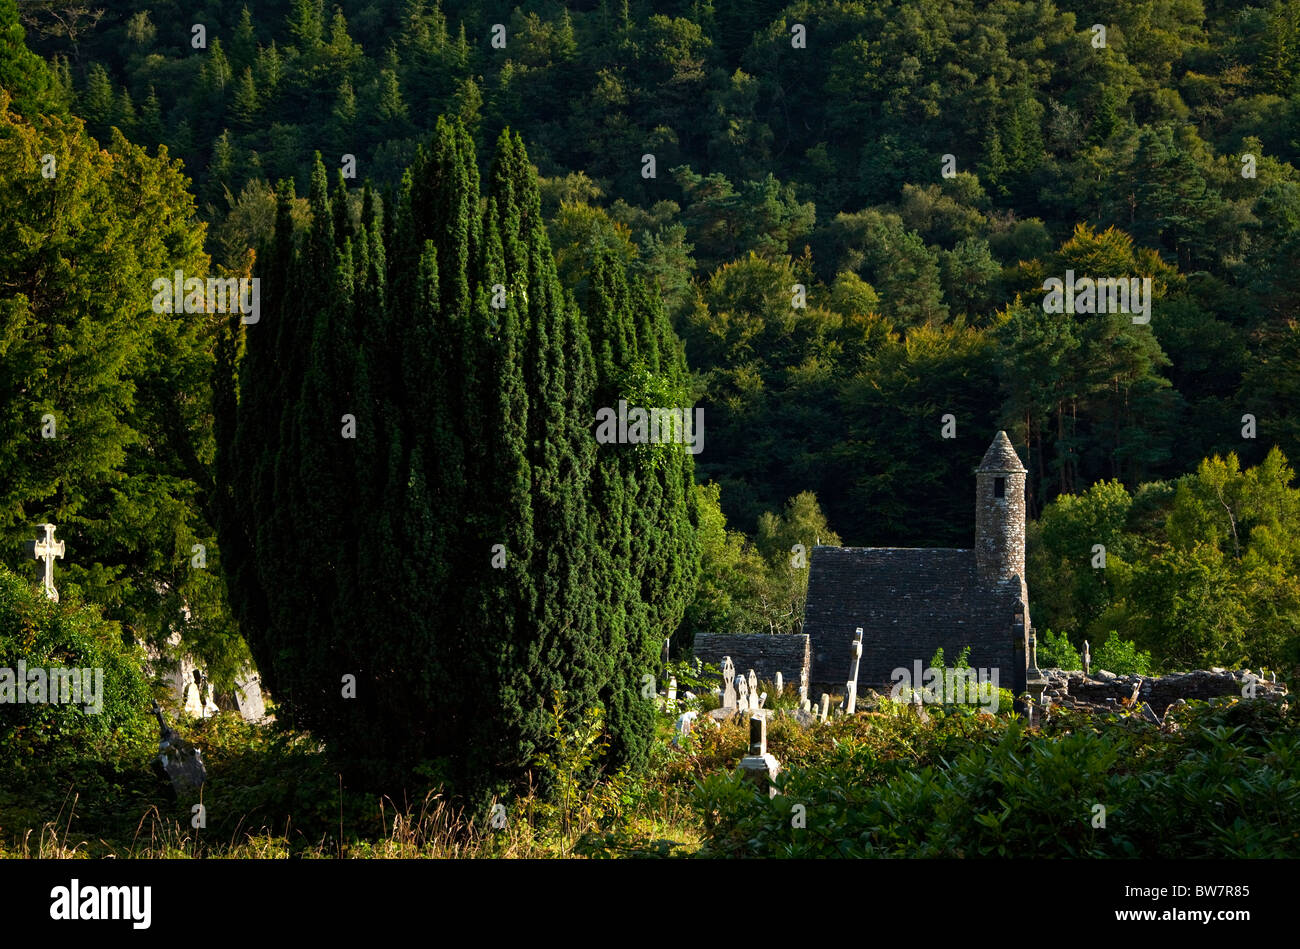 St Kevin's Church and graveyard in Glendalough Early Monastic Site, County Wicklow, Ireland Stock Photo